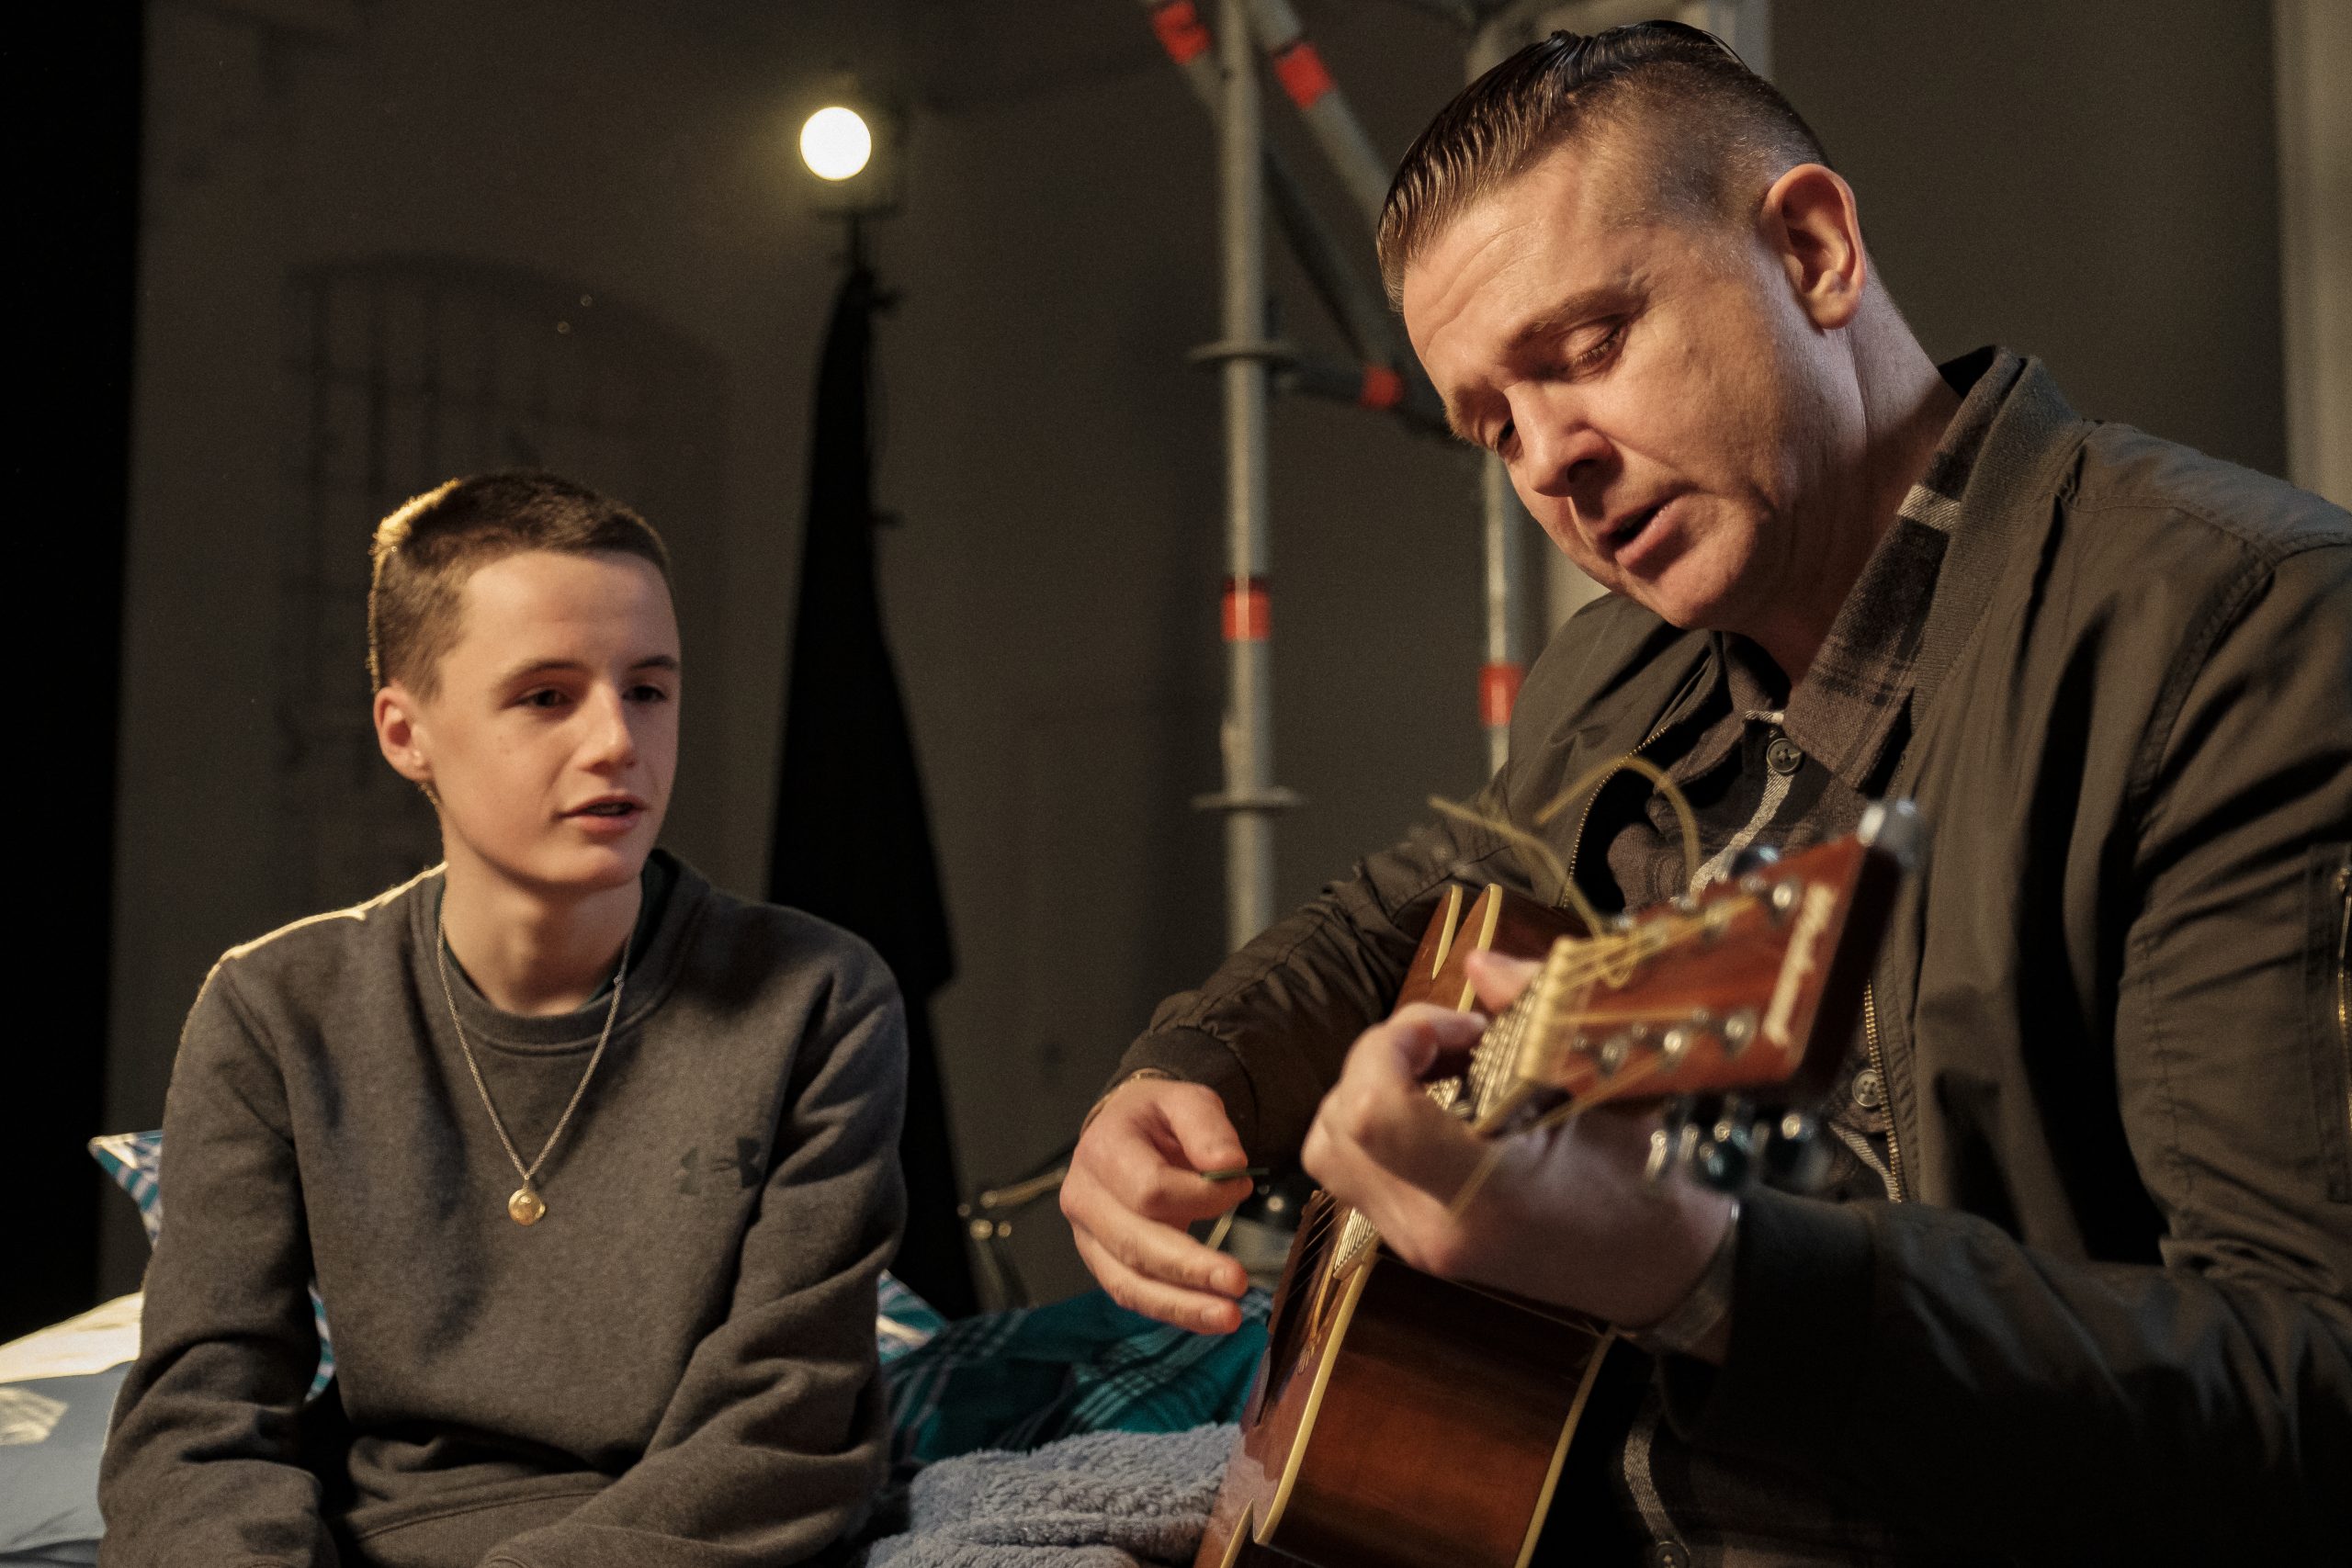 Damien Dempsey plays the guitar as a child looks on.